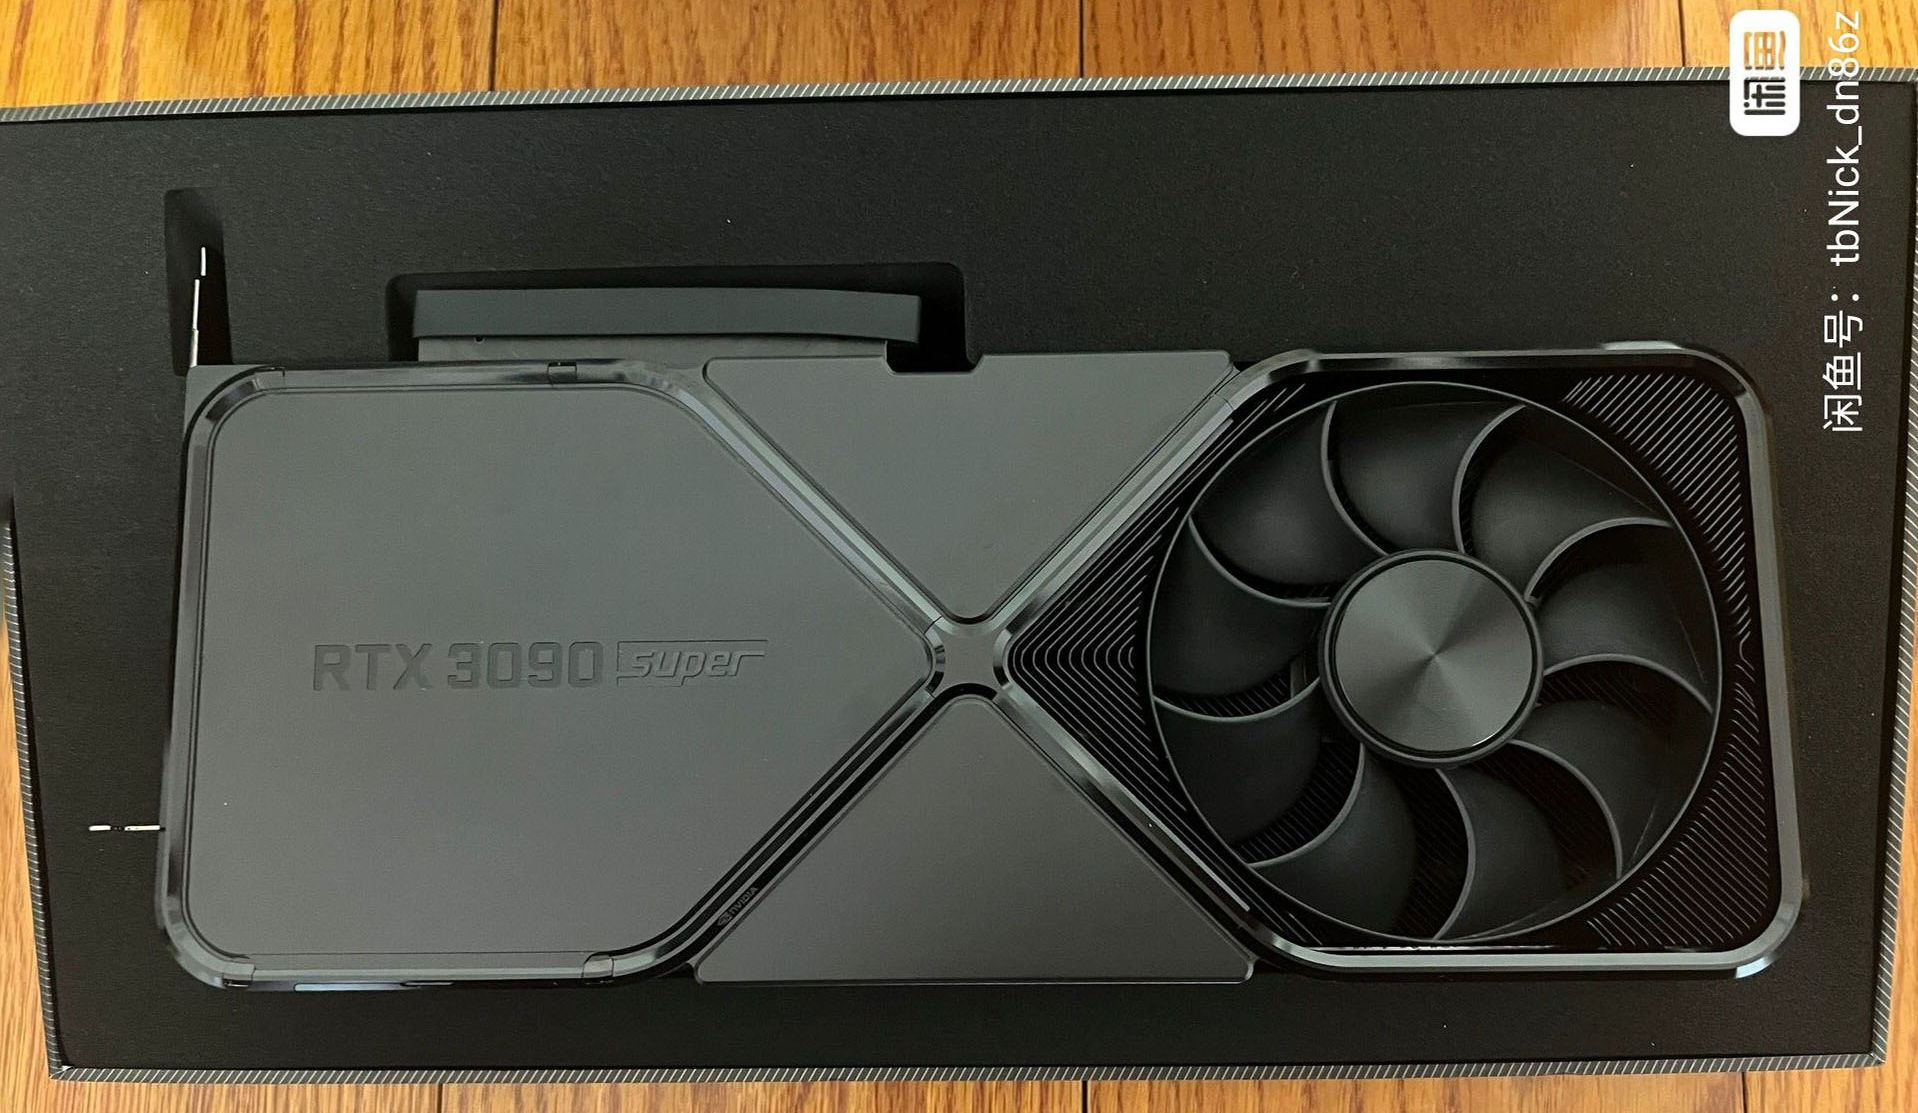 Unreleased GeForce RTX 3090 SUPER in all-black design has been pictured 